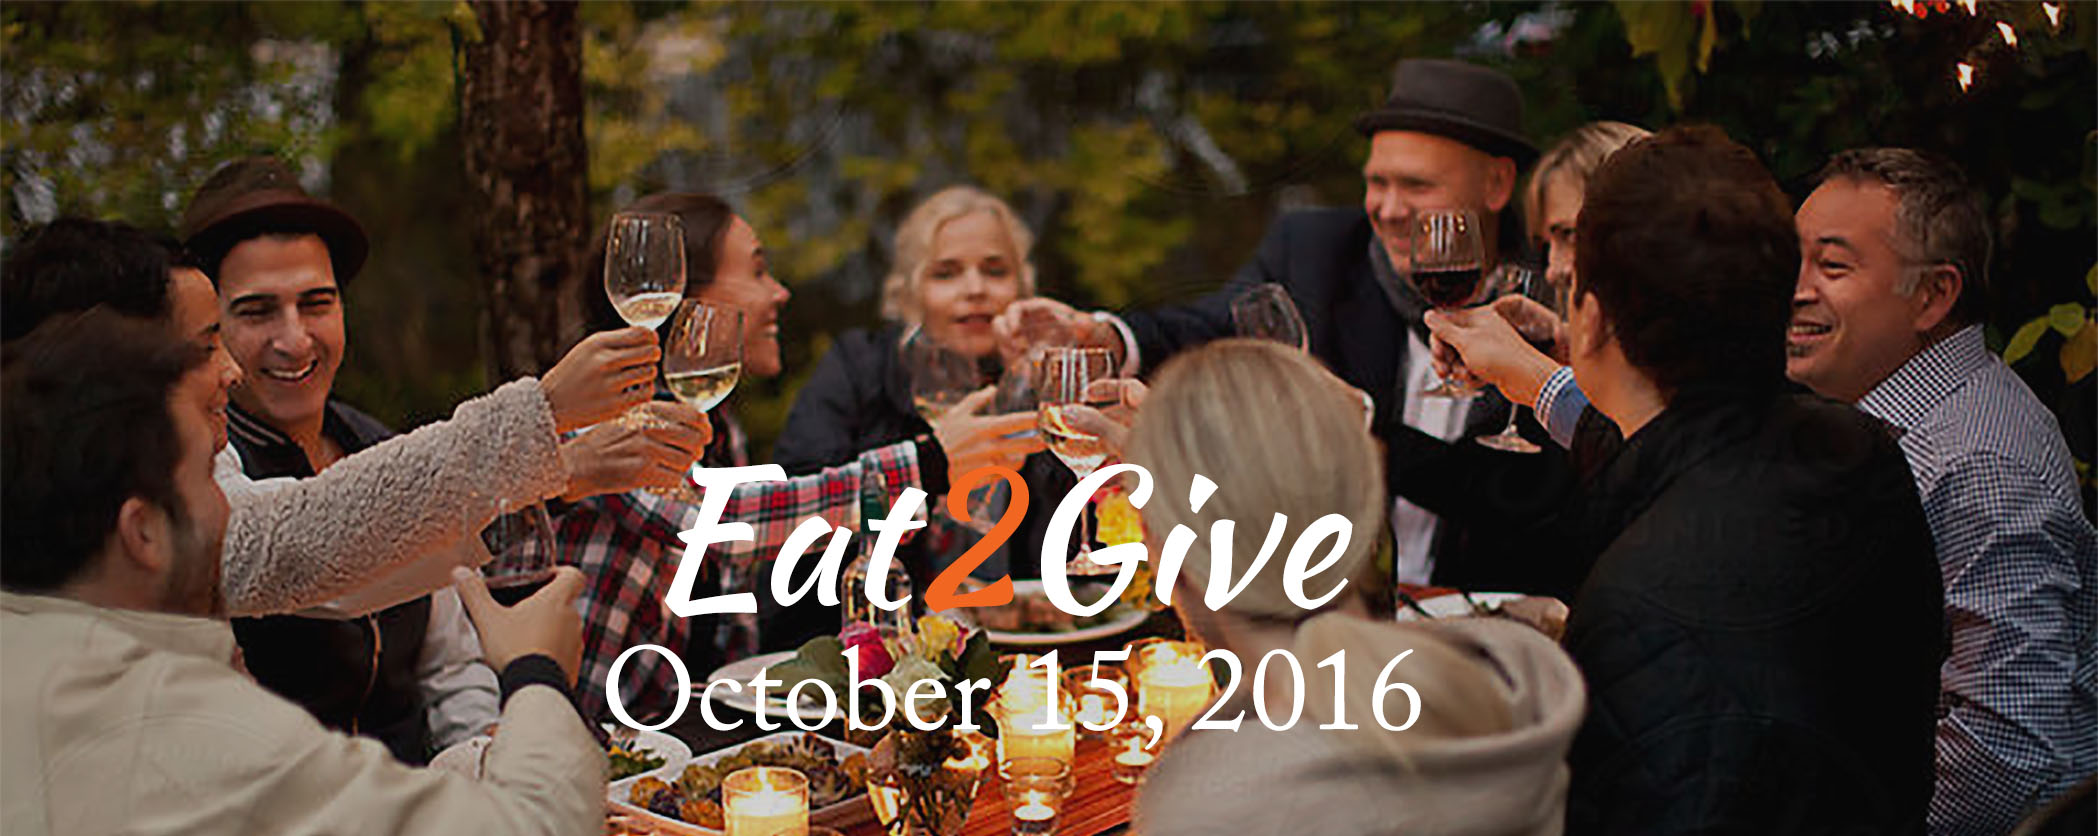 Eat2Give: A One-Day Food & Charity Event